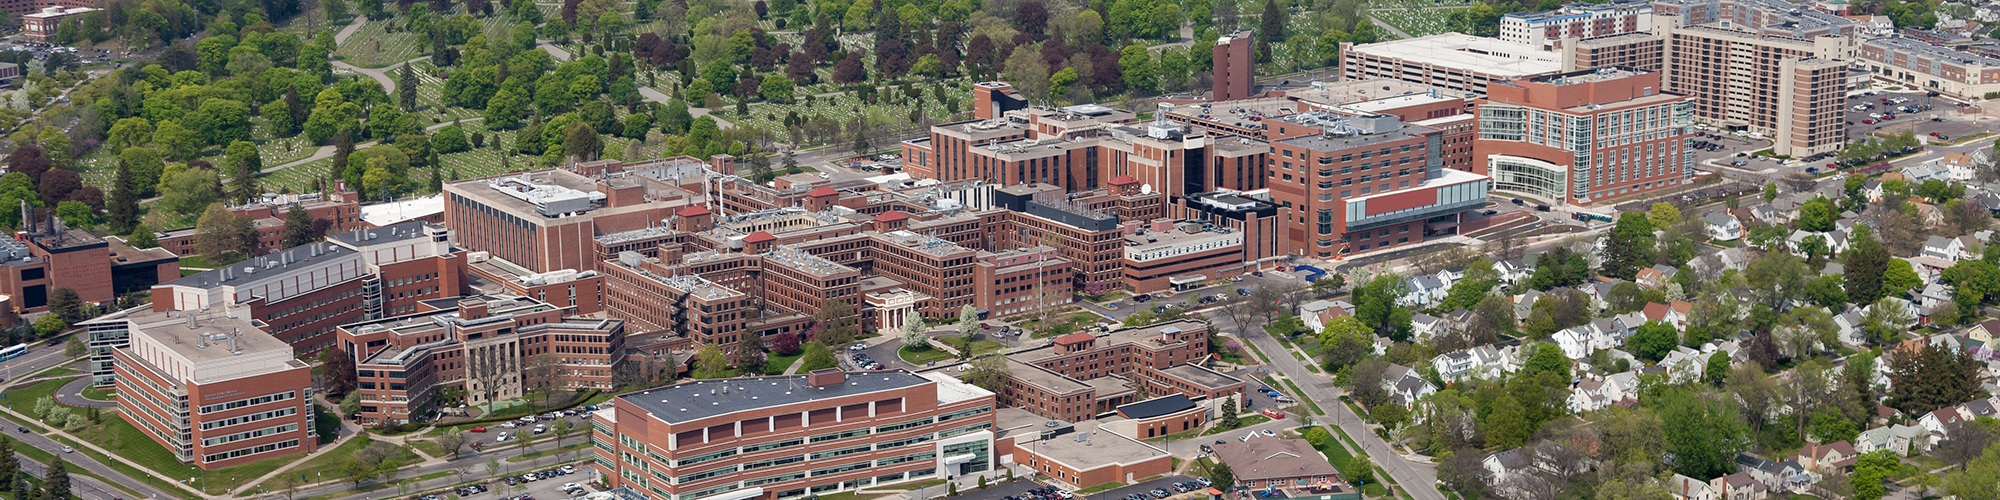 Aerial View of the University of Rochester Medical Center